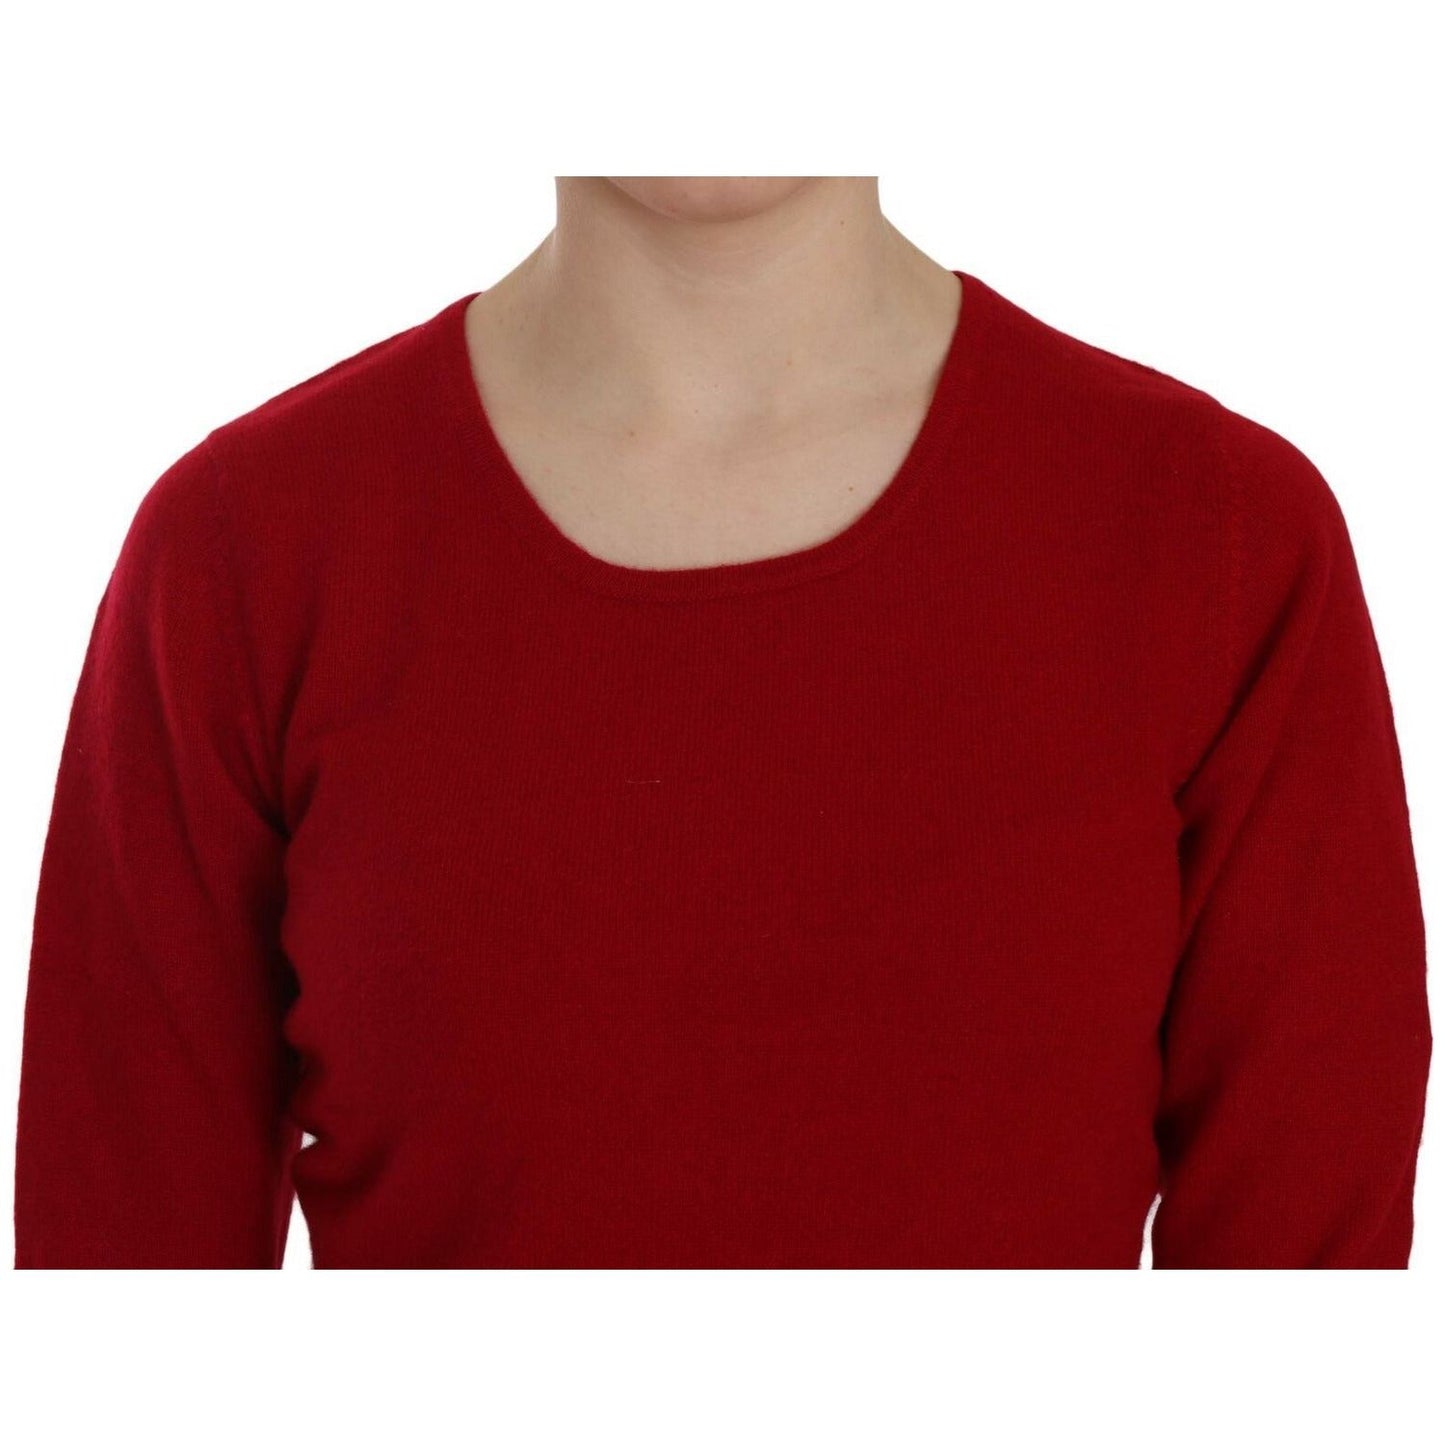 MILA SCHÖN Elegant Red Cashmere Pullover Blouse WOMAN SWEATERS red-round-neck-pullover-cashmere-sweater